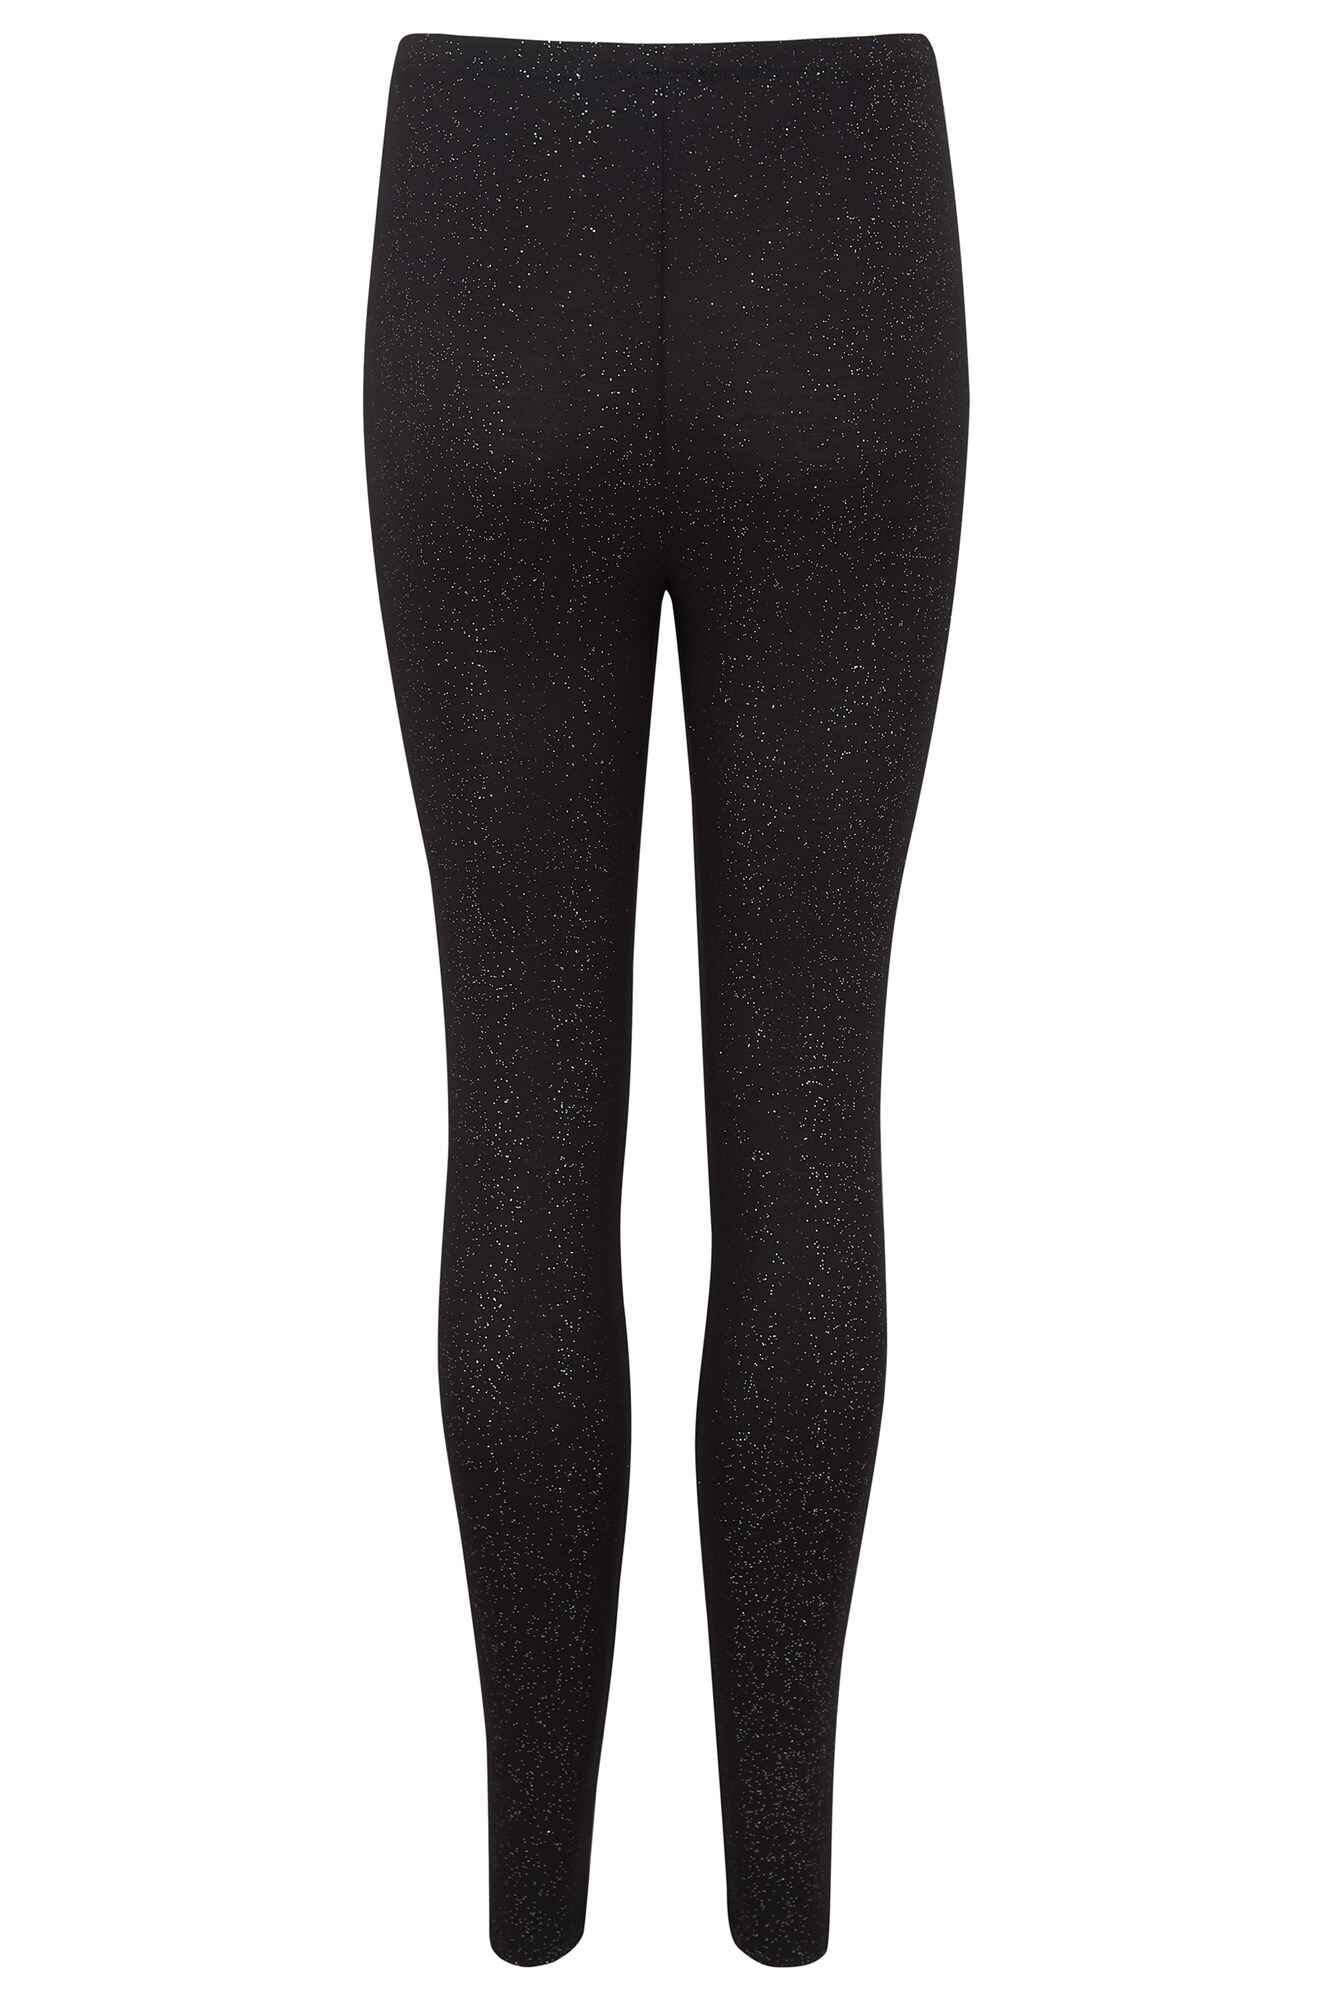 Charnos Second Skin Thermal Leggings, Pour Moi